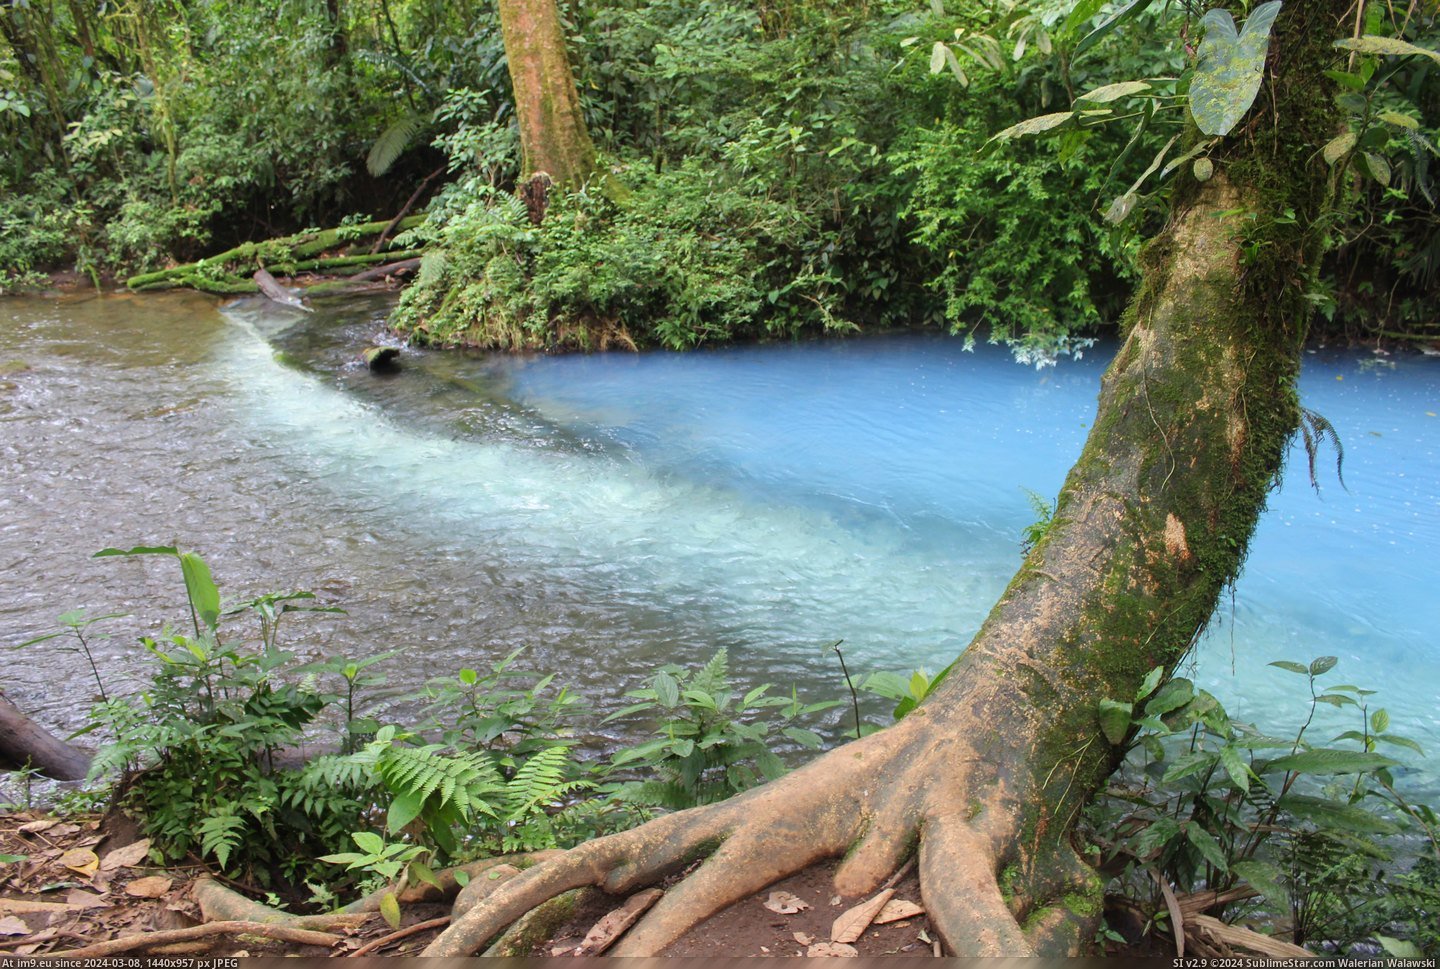 #5184x3456 #Rio #Costa #Celeste #Birthplace #Rica #Waters #Unbelievable [Earthporn] The birthplace of the unbelievable waters of the Rio Celeste, Costa Rica  [5184x3456] Pic. (Obraz z album My r/EARTHPORN favs))